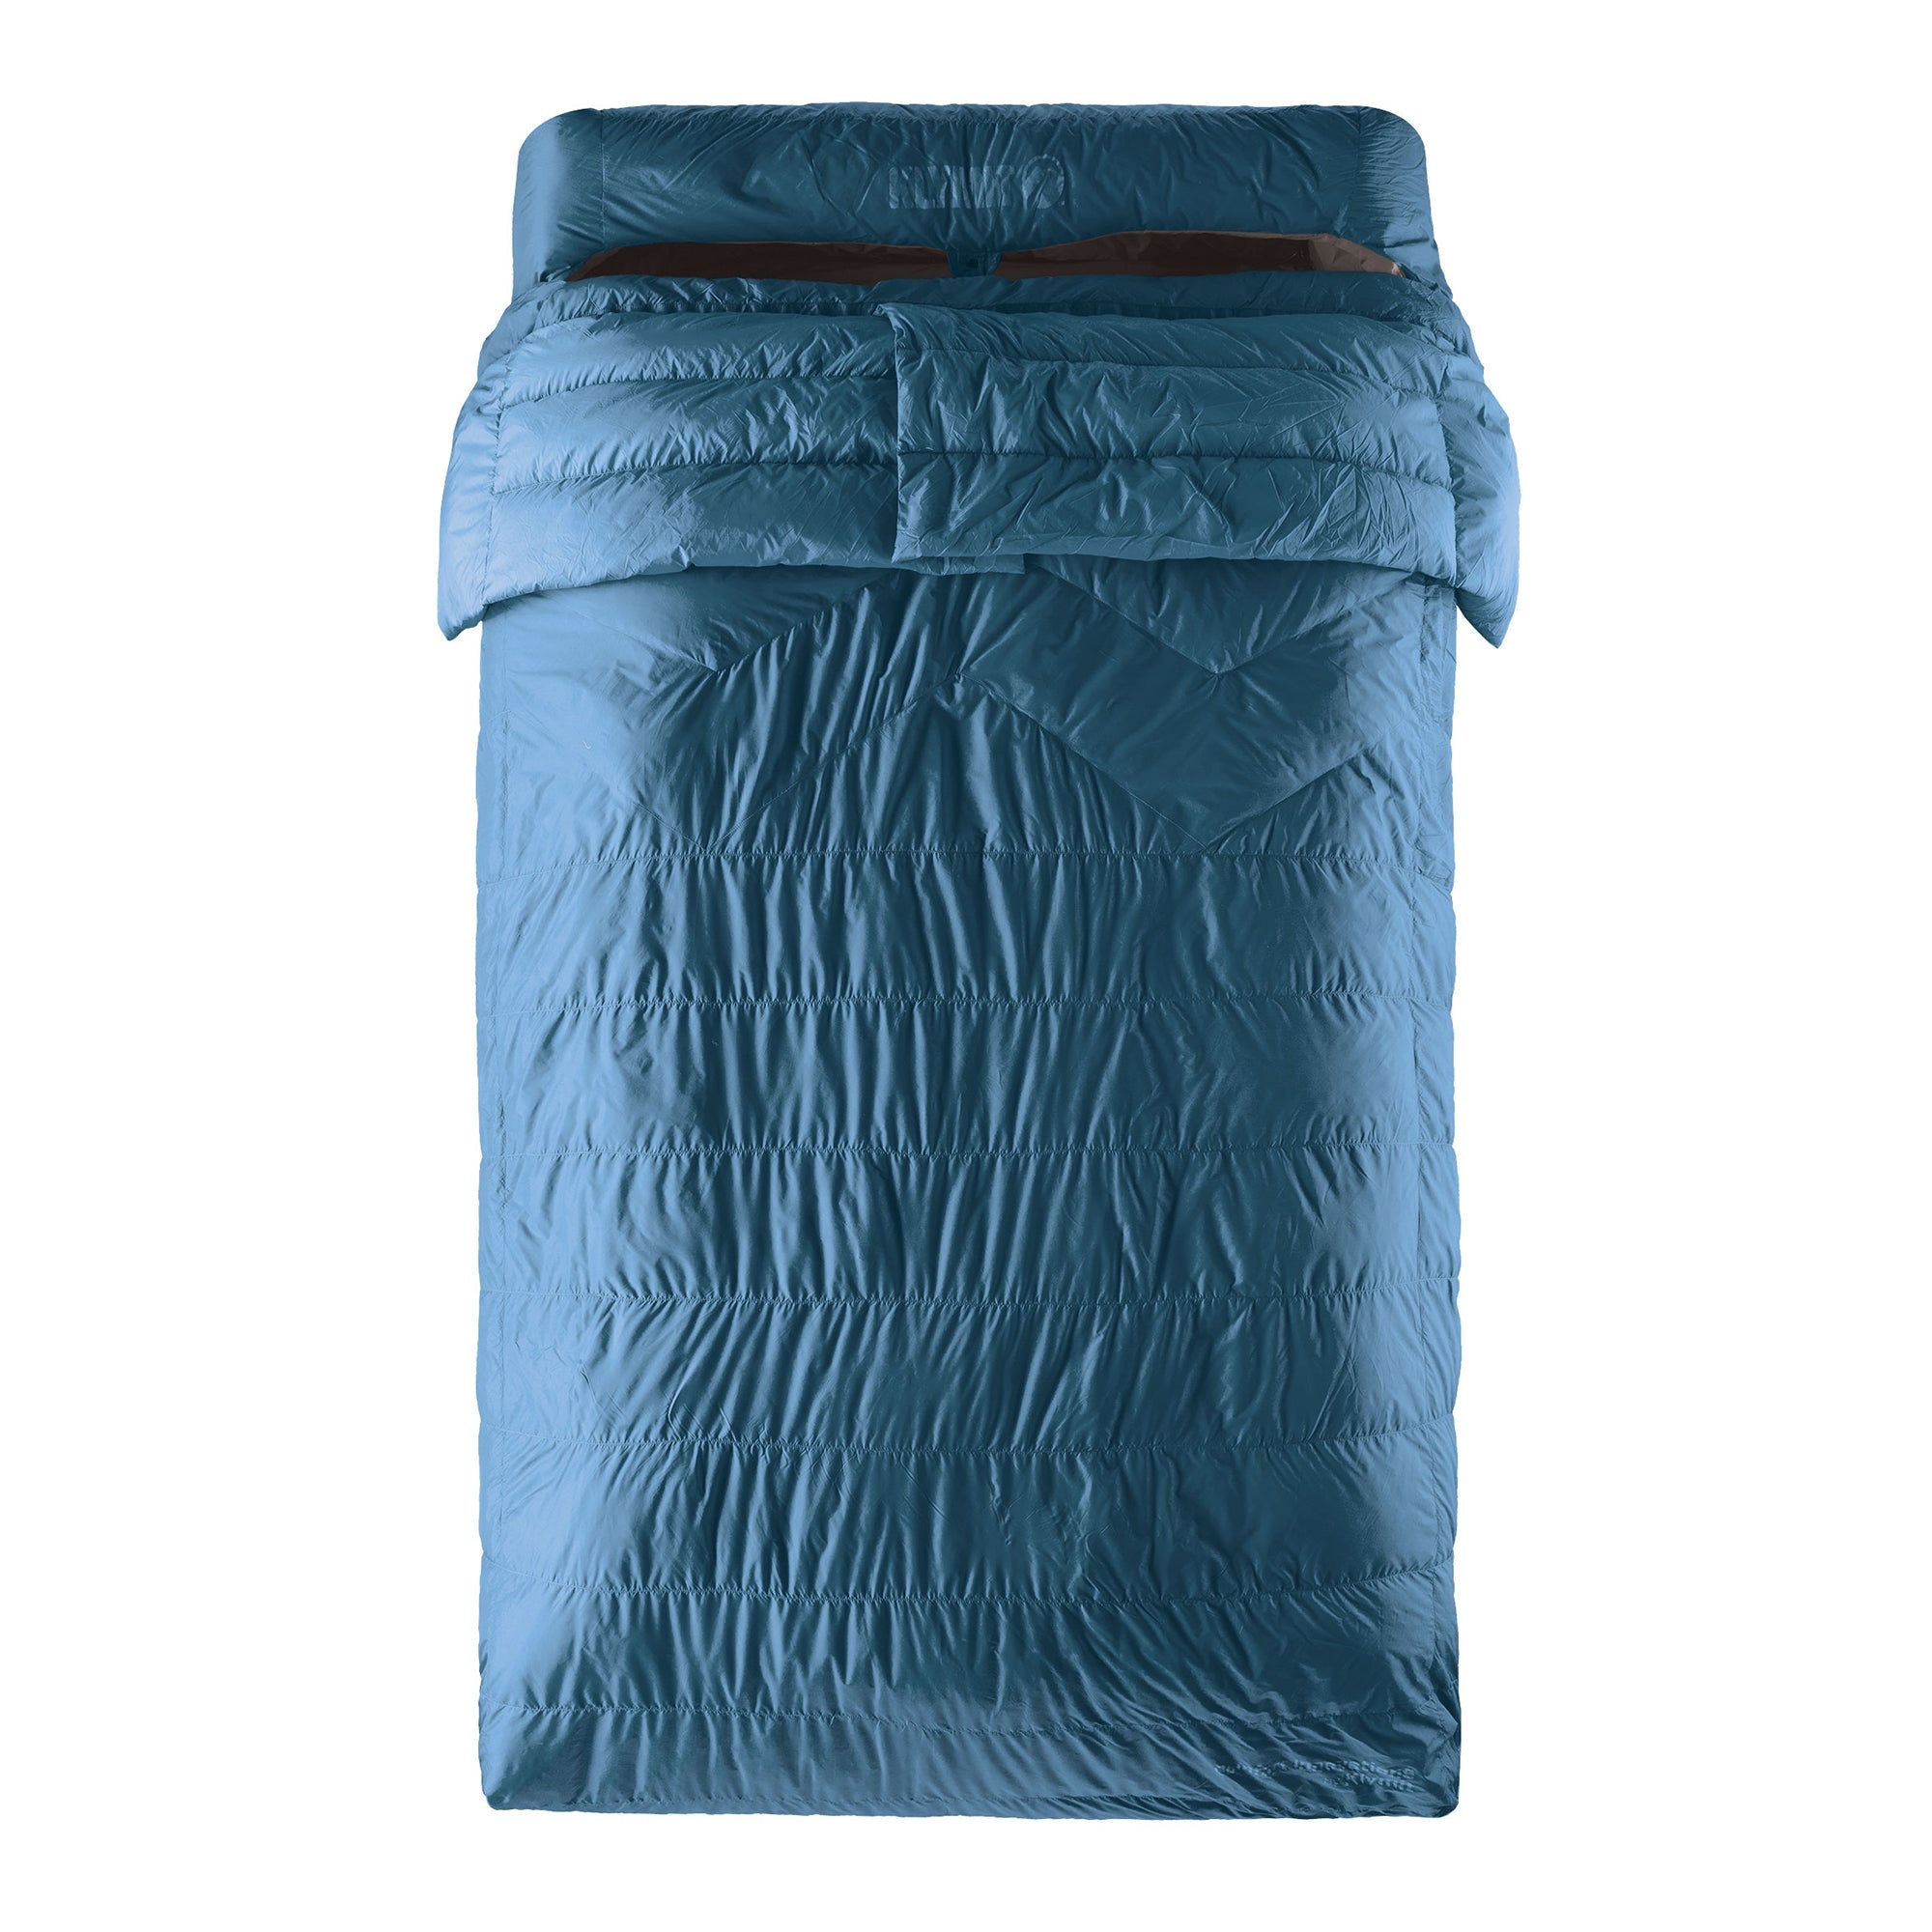 Goplus Double 2 Person Sleeping Bag Waterproof w/ 2 Pillows Camping - Queen  - Bed Bath & Beyond - 24043833